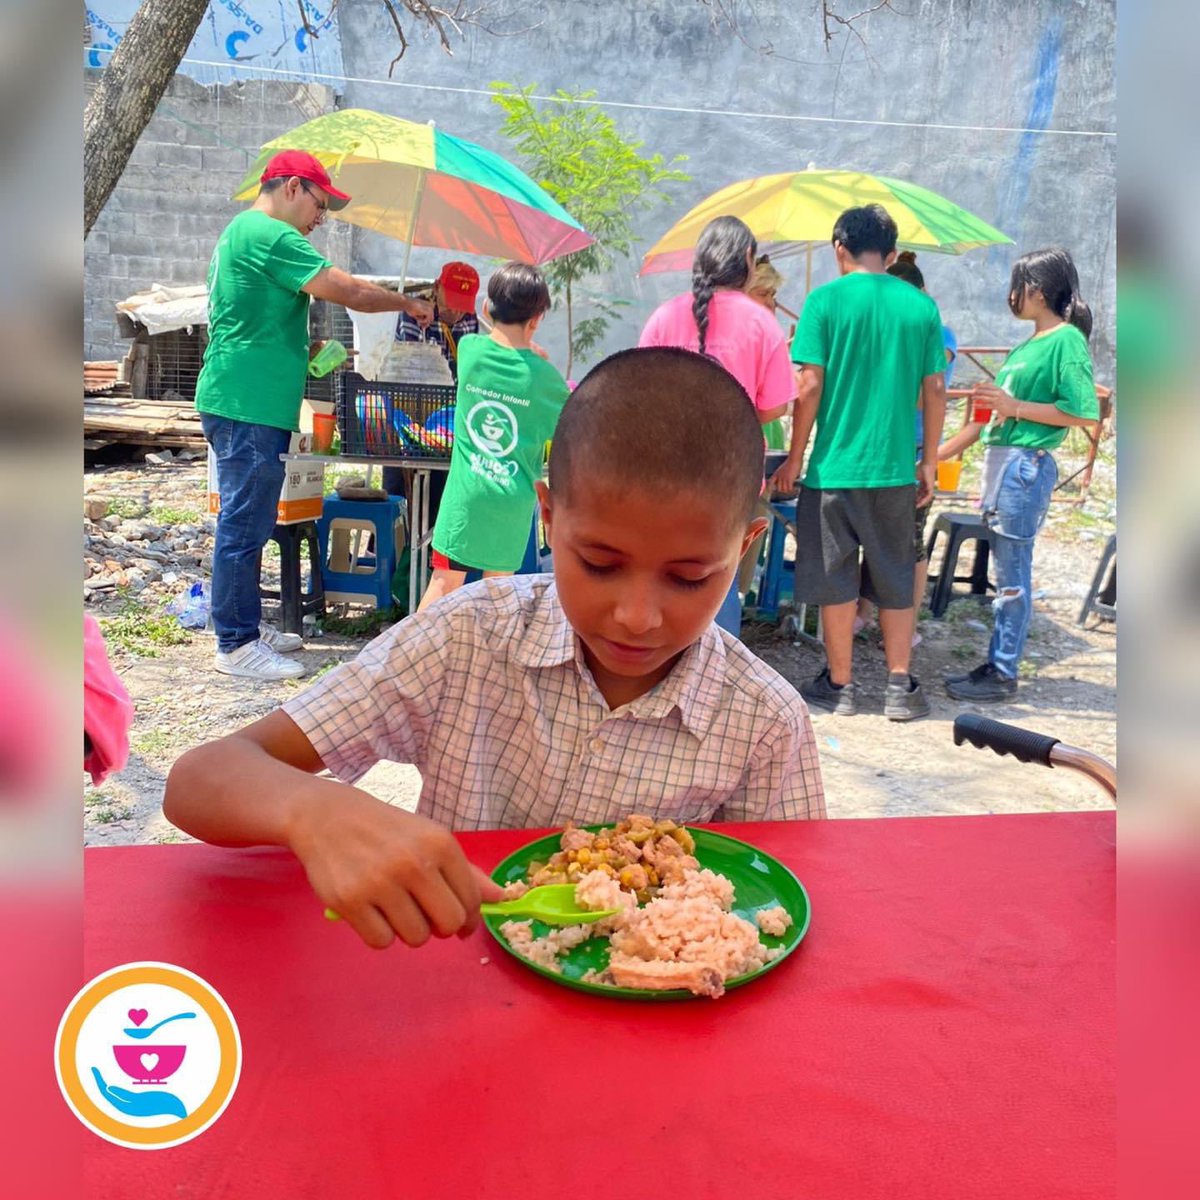 Every bite matters in a child's growth. 🌱🍴💪 Help us forge a stronger and healthier future for the little ones. Your support makes a difference in the fight against child malnutrition. Together, we are an unstoppable team! 🌟🤜🤛  #UnitedForTheChildren #FeedingFutures